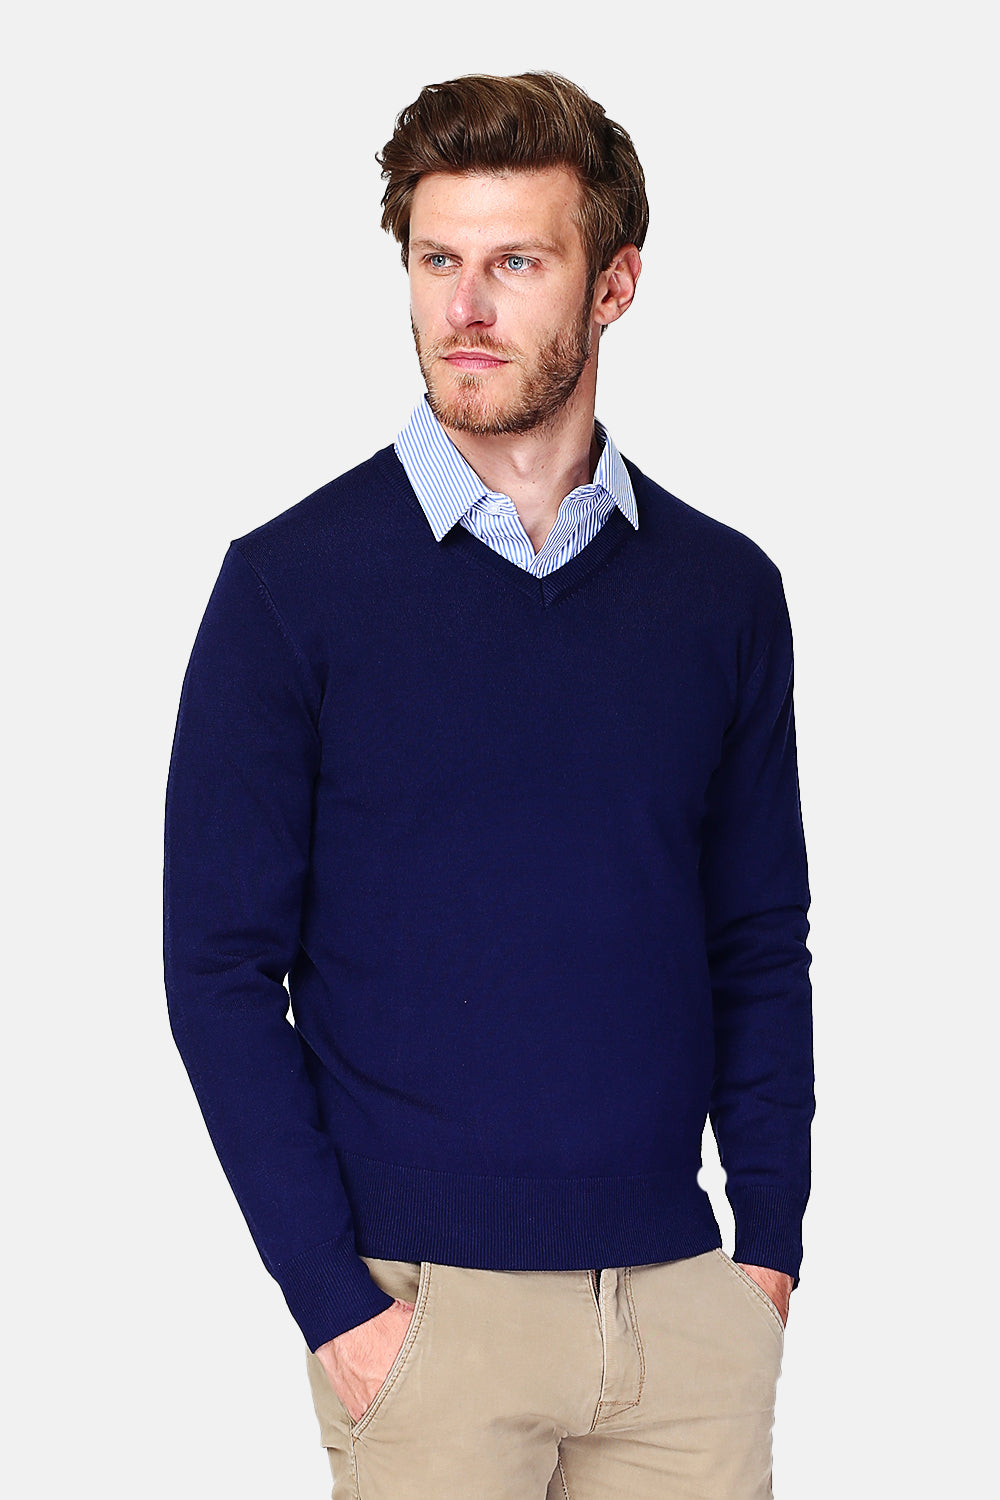 Classic V-neck sweater with long sleeves knitting in 3 threads